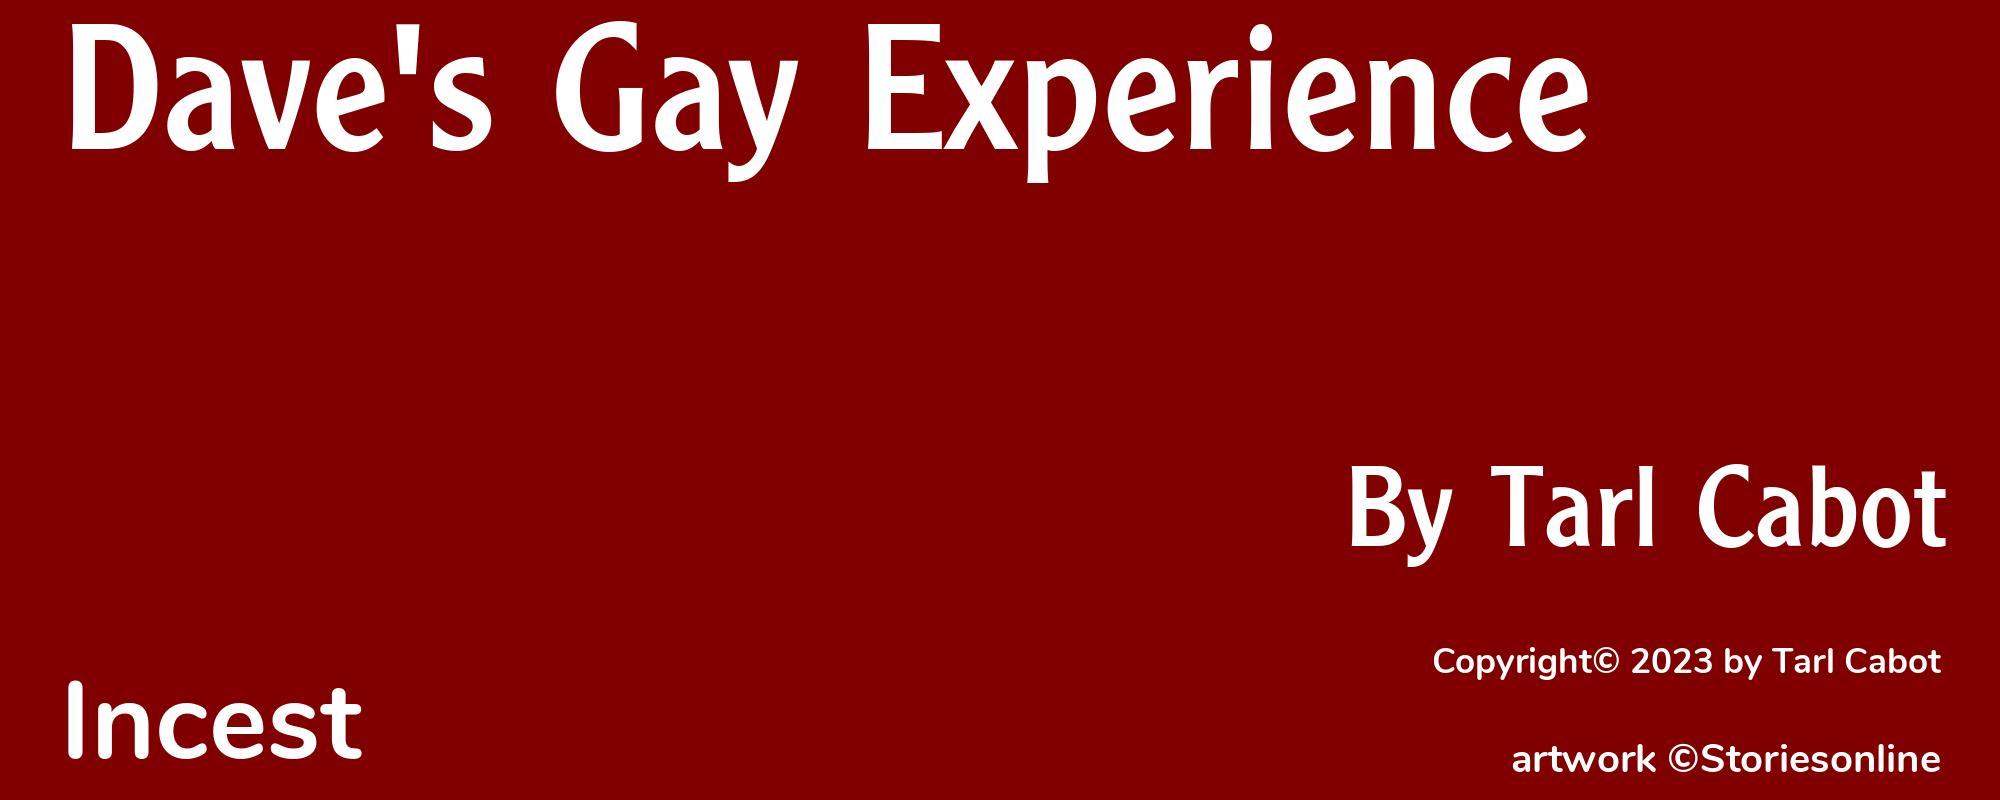 Dave's Gay Experience - Cover